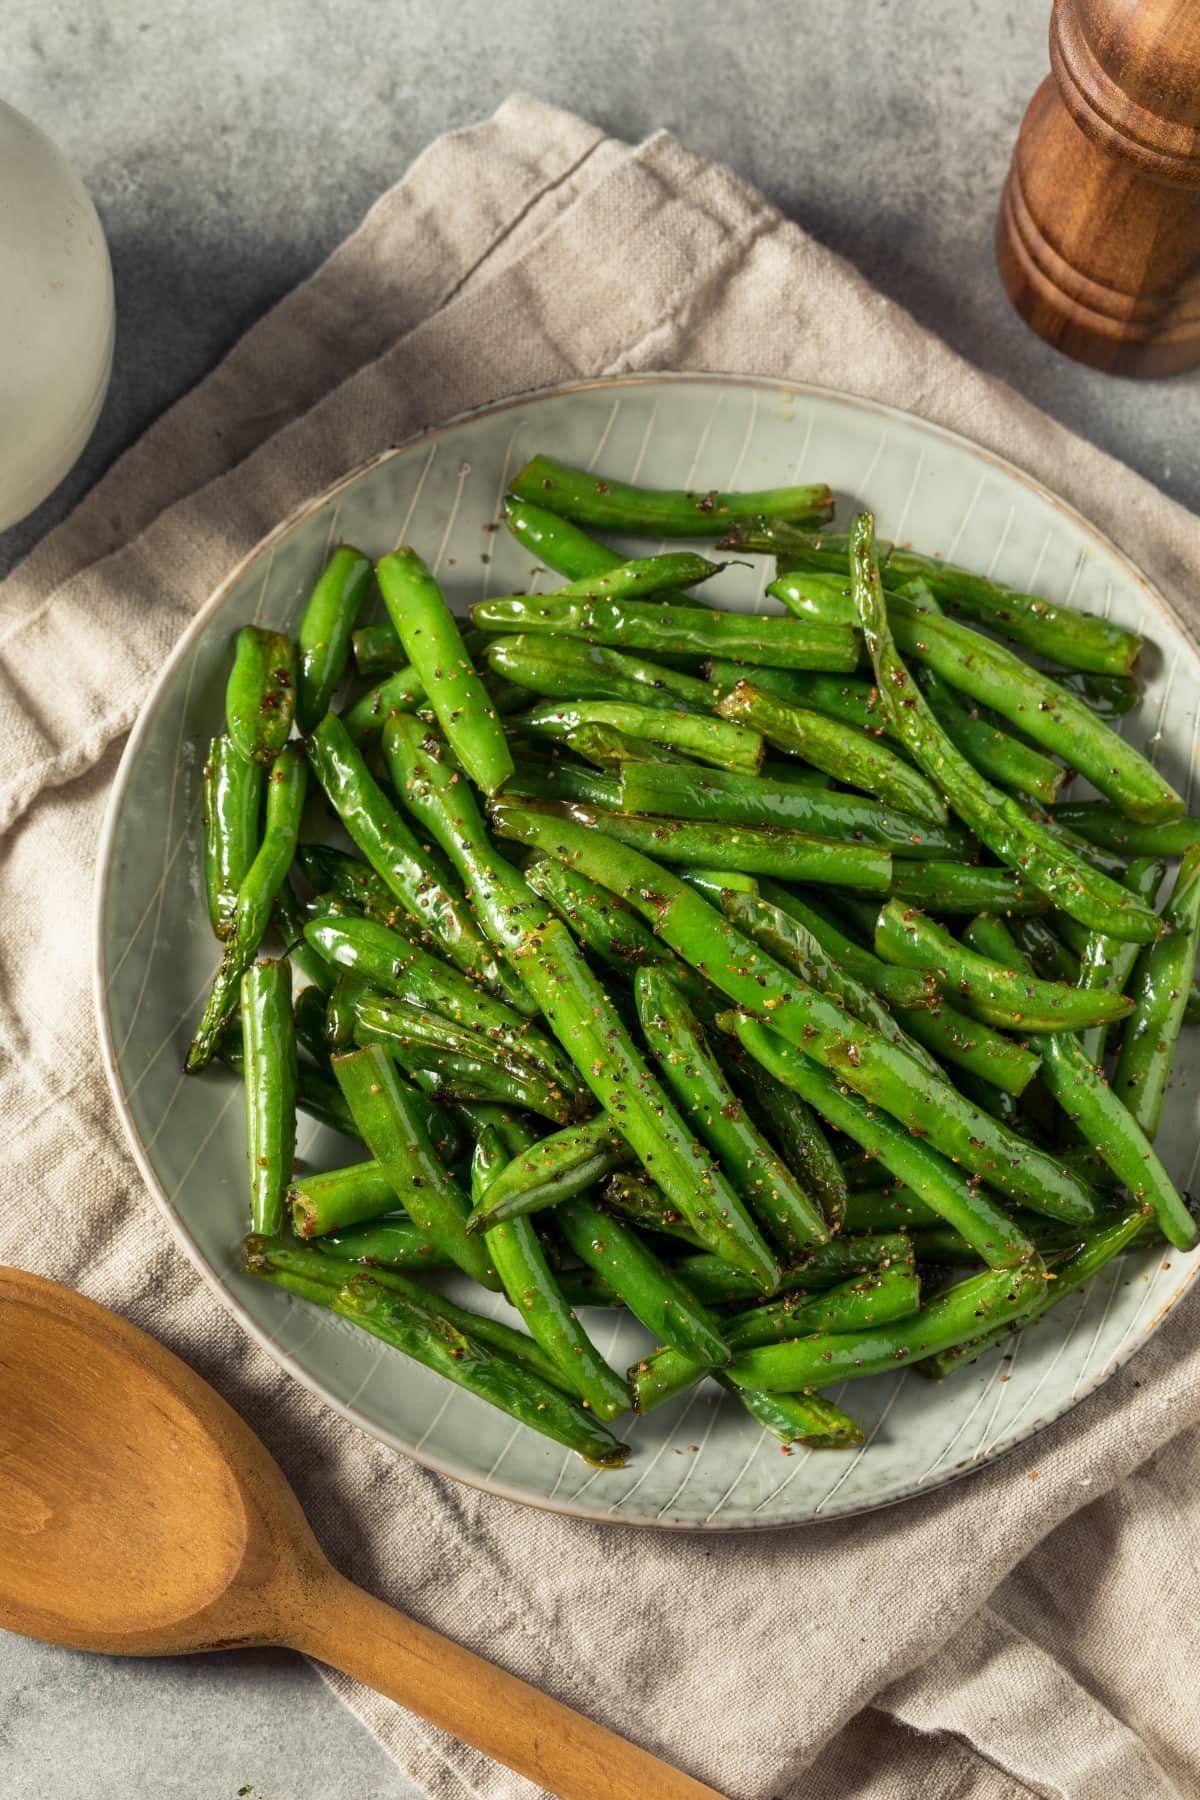 How to Steam Green Beans in the Microwave featuring a Dish of Microwave-Steamed Green Beans, Seasoned with Salt and Black Pepper